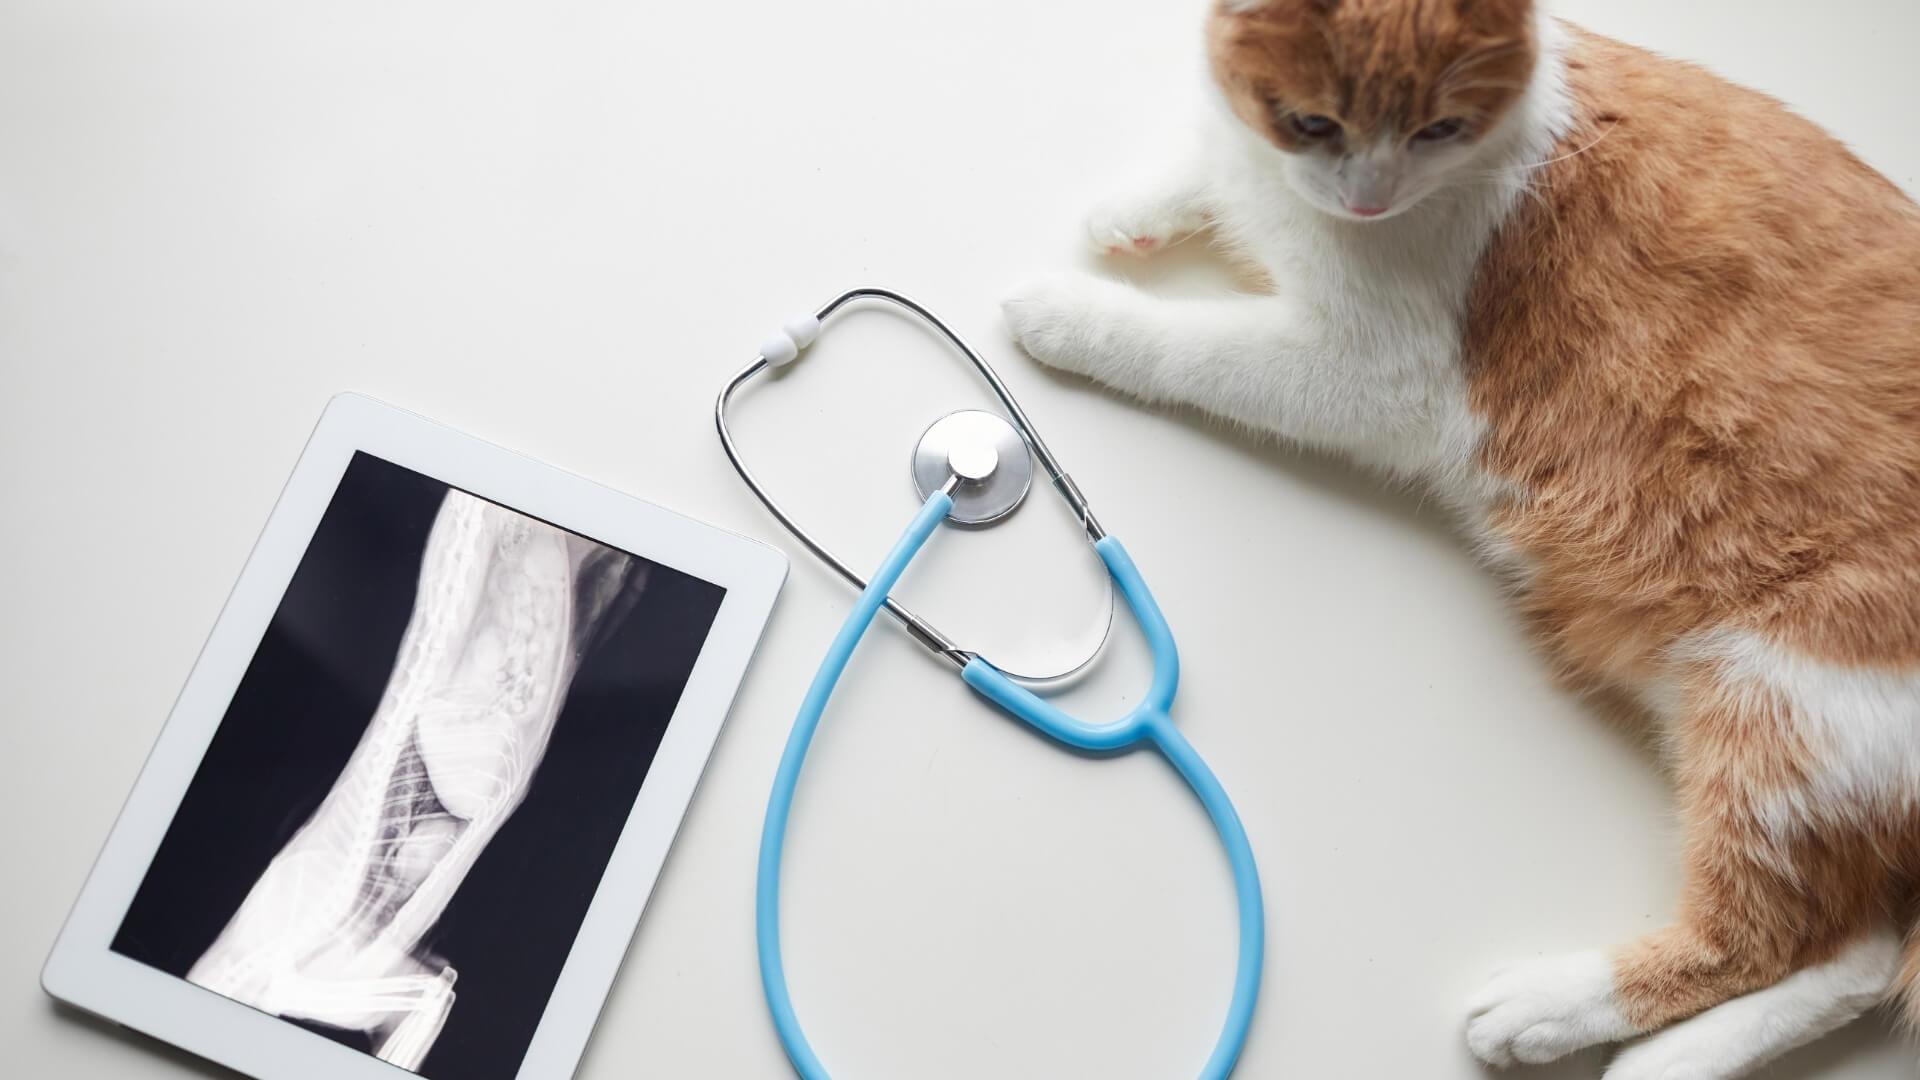 Orange and White Cat Lounging Next to Stethoscope and X-Ray